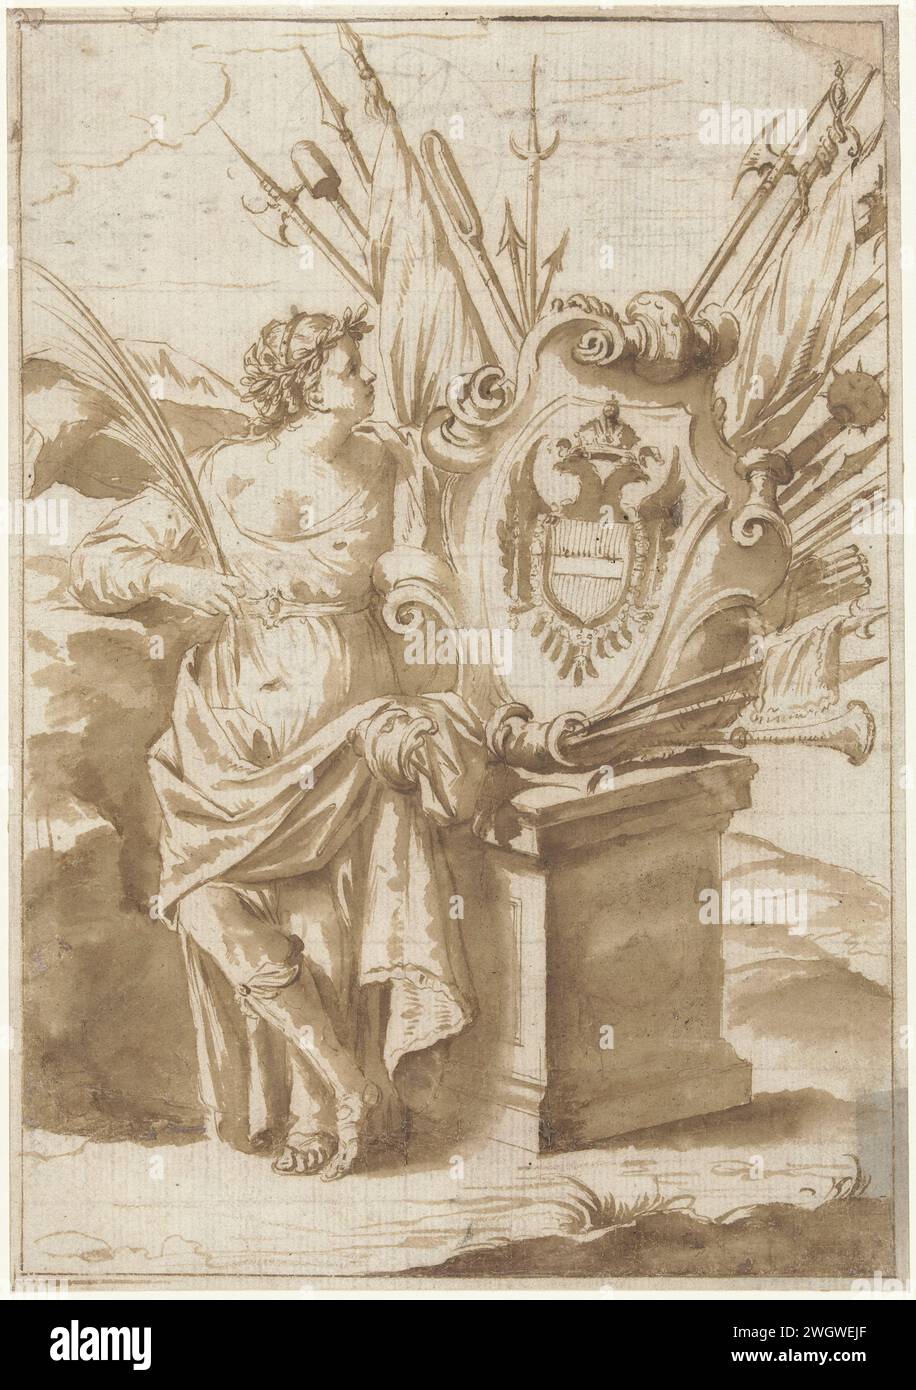 Woman at Het Wapdschild of Austria, Anonymous, 1600 - 1699 drawing Woman with a peace palm at the coat of arms of Austria surrounded by weapon trophies. Possibly a design for a title page.  paper. ink pen / brush symbols, allegories of peace, 'Pax'; 'Pace' (Ripa). coat of arms (as symbol of the state, etc.) (+ nation; national) Austria Stock Photo